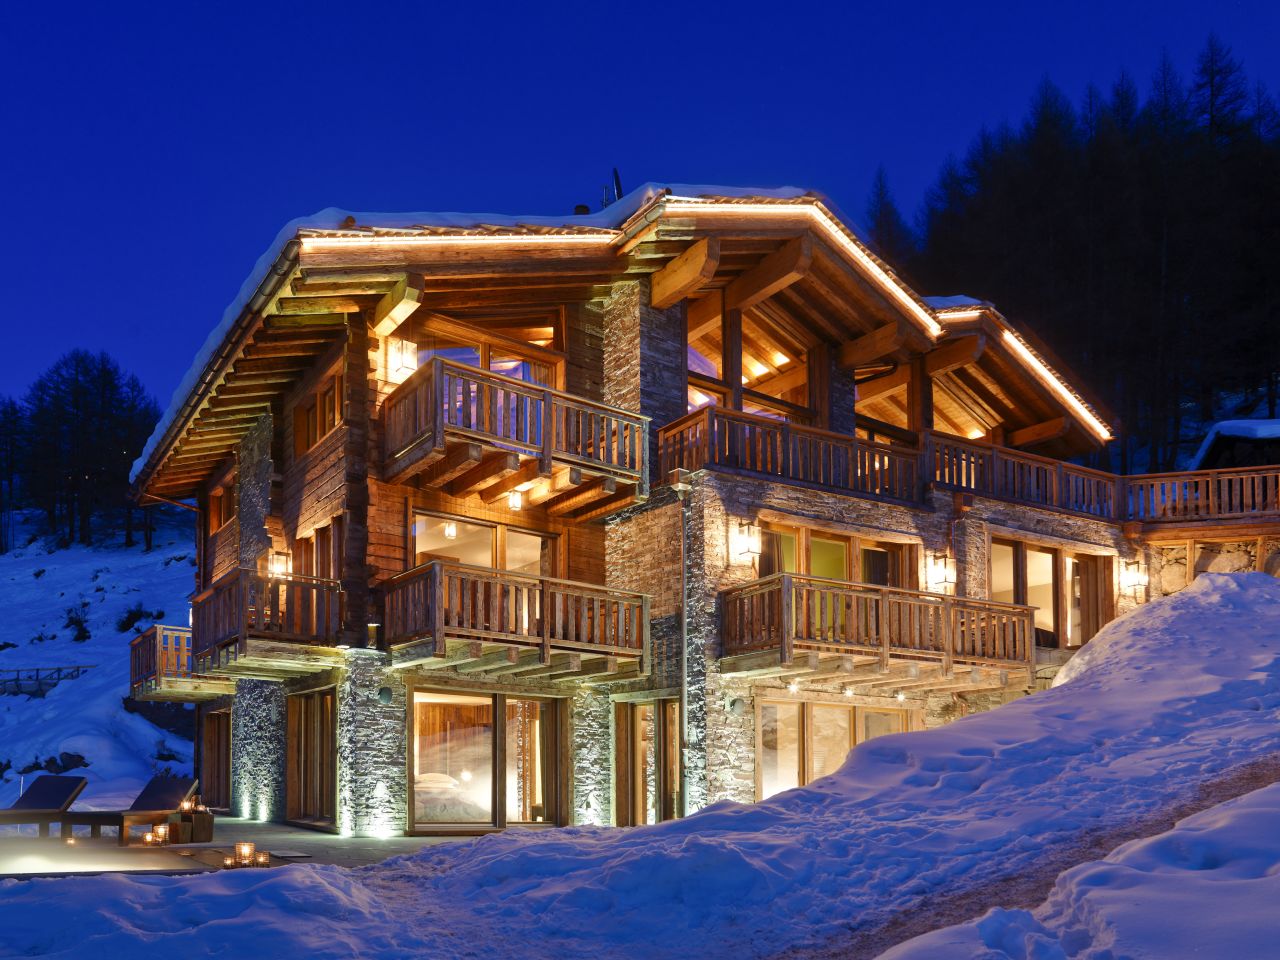 <strong>World's Best Ski Chalet -- Chalet Les Anges, Zermatt, Switzerland: </strong>Perched above the historic chocolate-box town of Zermatt, Chalet Les Anges is one of the most desirable properties in Switzerland.